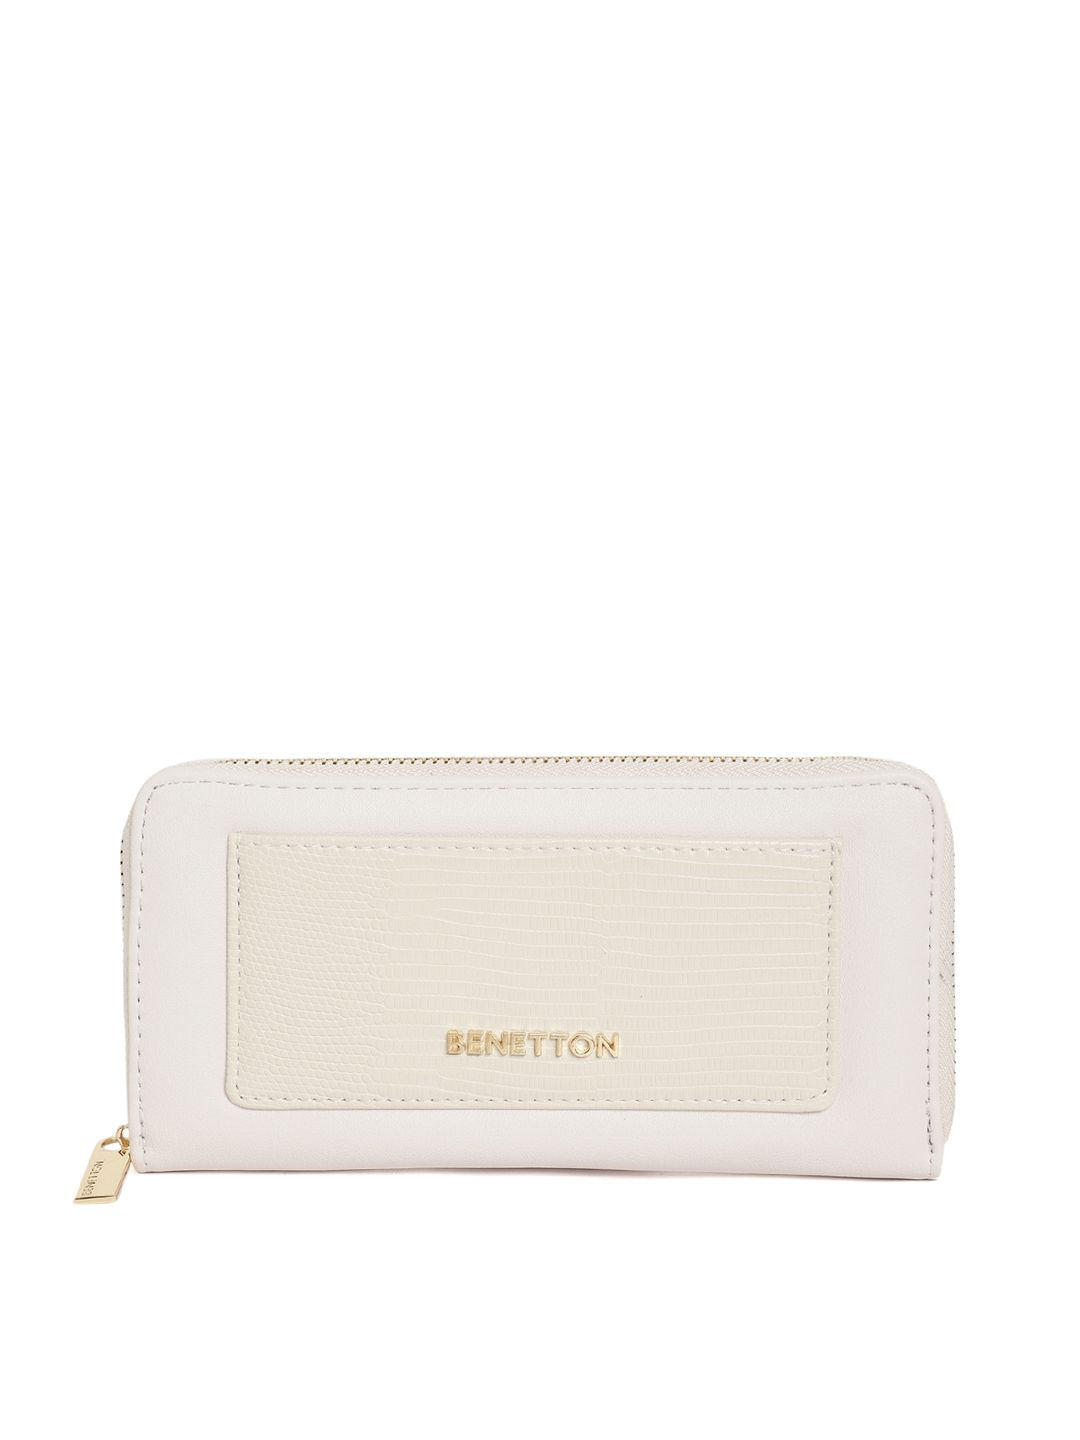 United Colors of Benetton Women White Zip Around Wallet Price in India